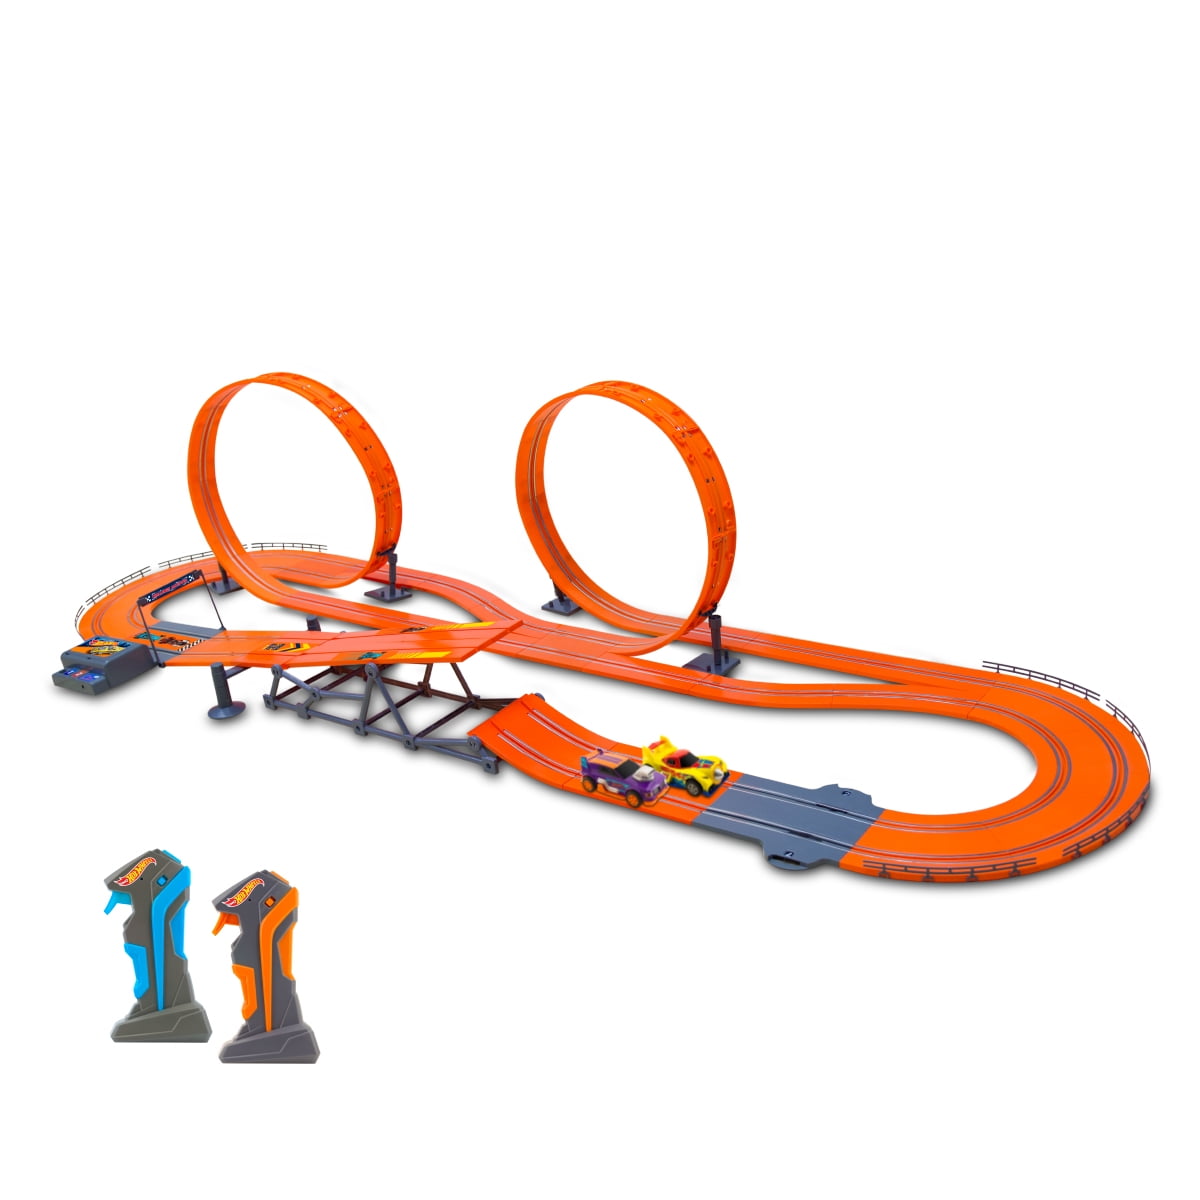 2 Hot Wheels Wall Tracks Replacement Bracket And 2 Bases.